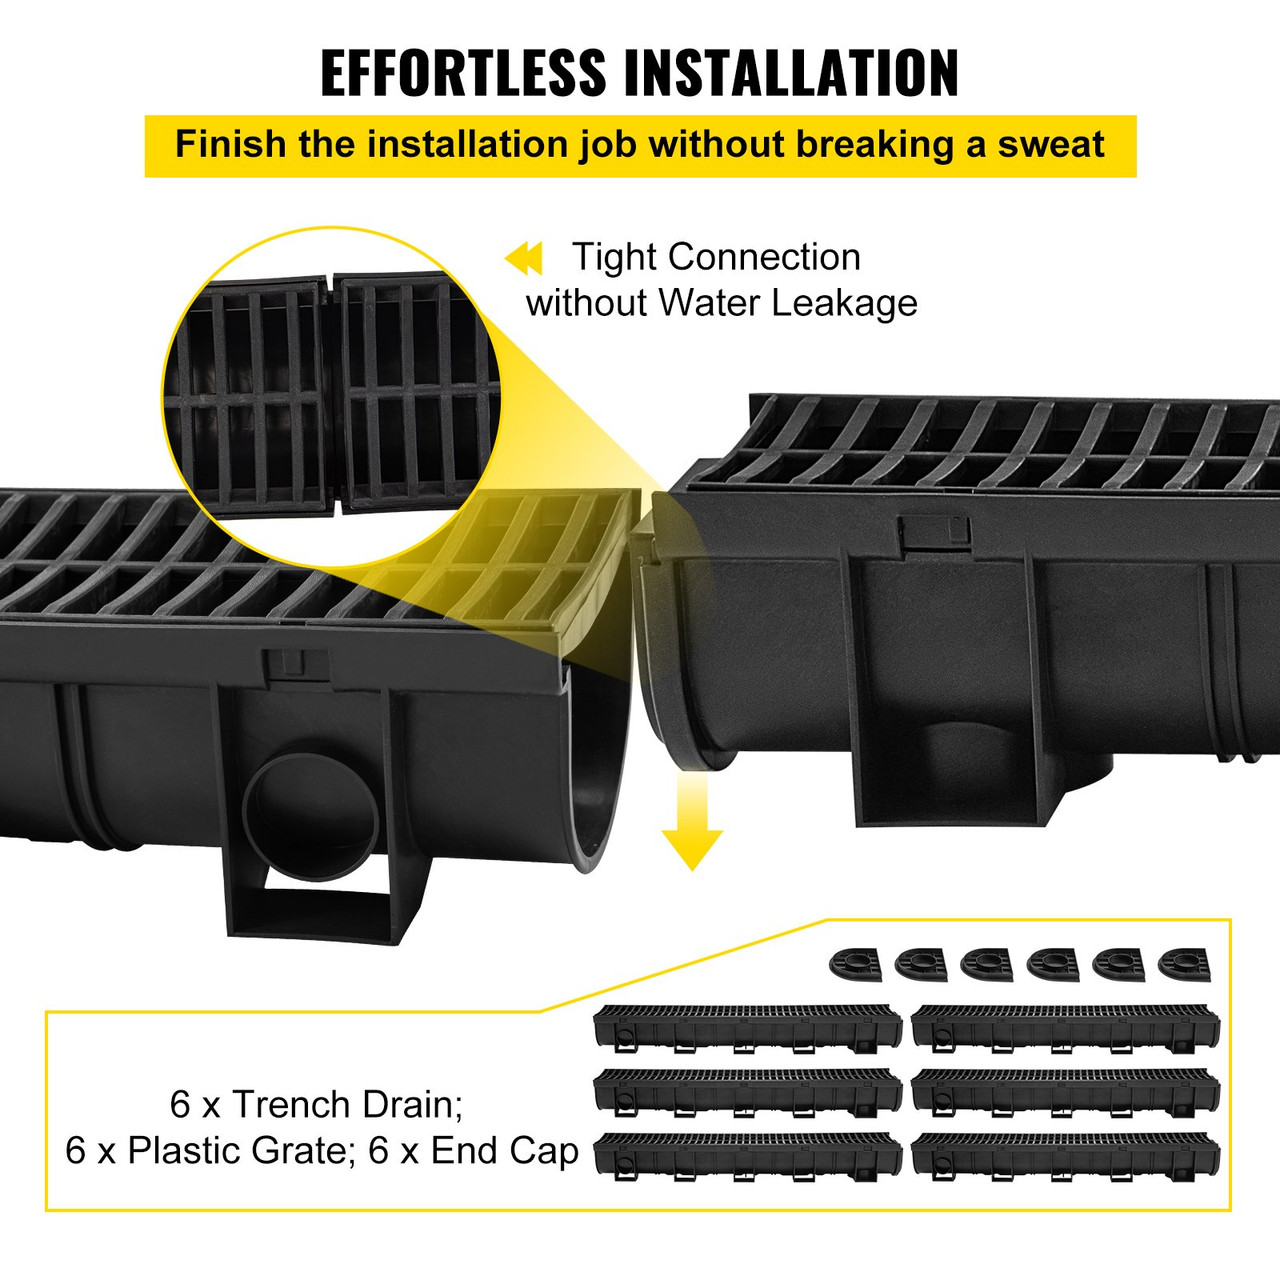 Trench Drain System, Channel Drain with Plastic Grate, 5.9x5.1-Inch HDPE Drainage Trench, Black Plastic Garage Floor Drain, 6x39 Trench Drain Grate, with 6 End Caps, for Garden, Driveway-6 Pack